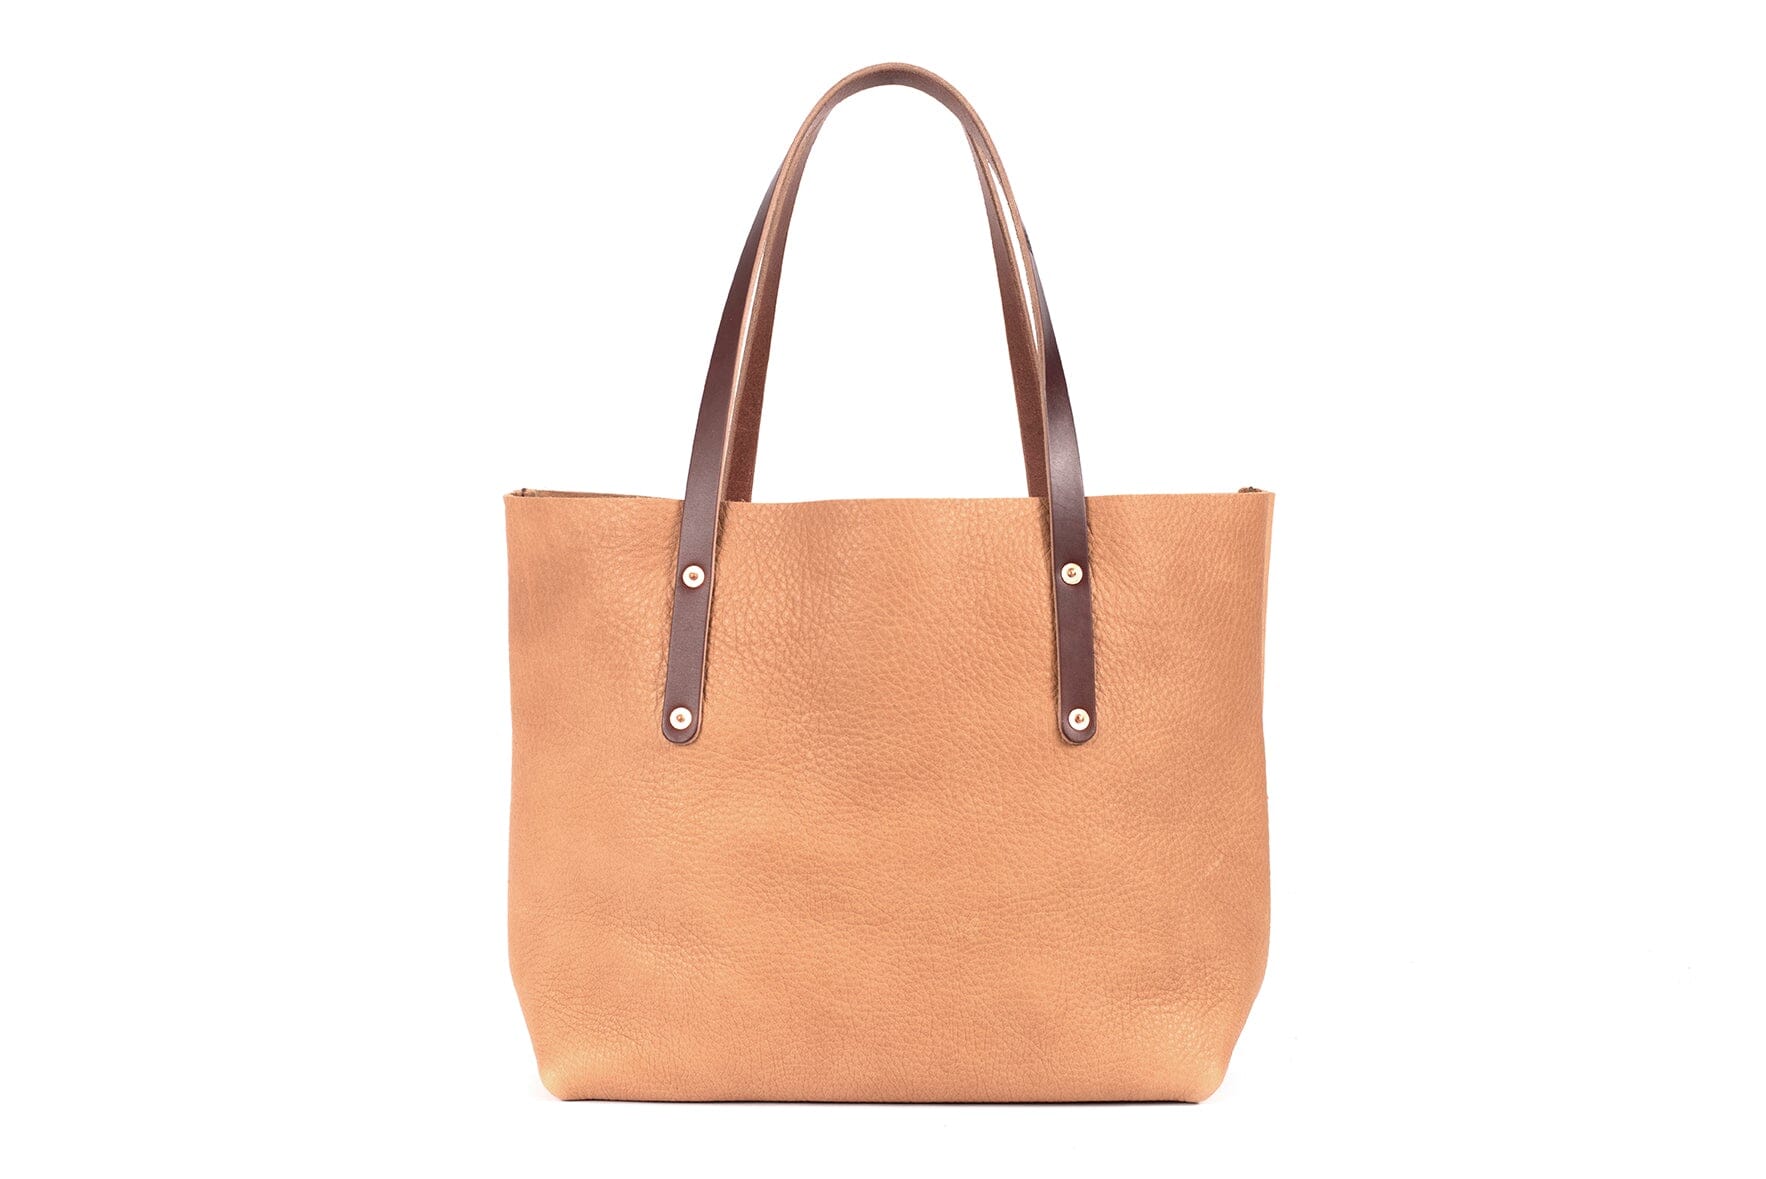 AVERY LEATHER TOTE BAG - LARGE - TAN